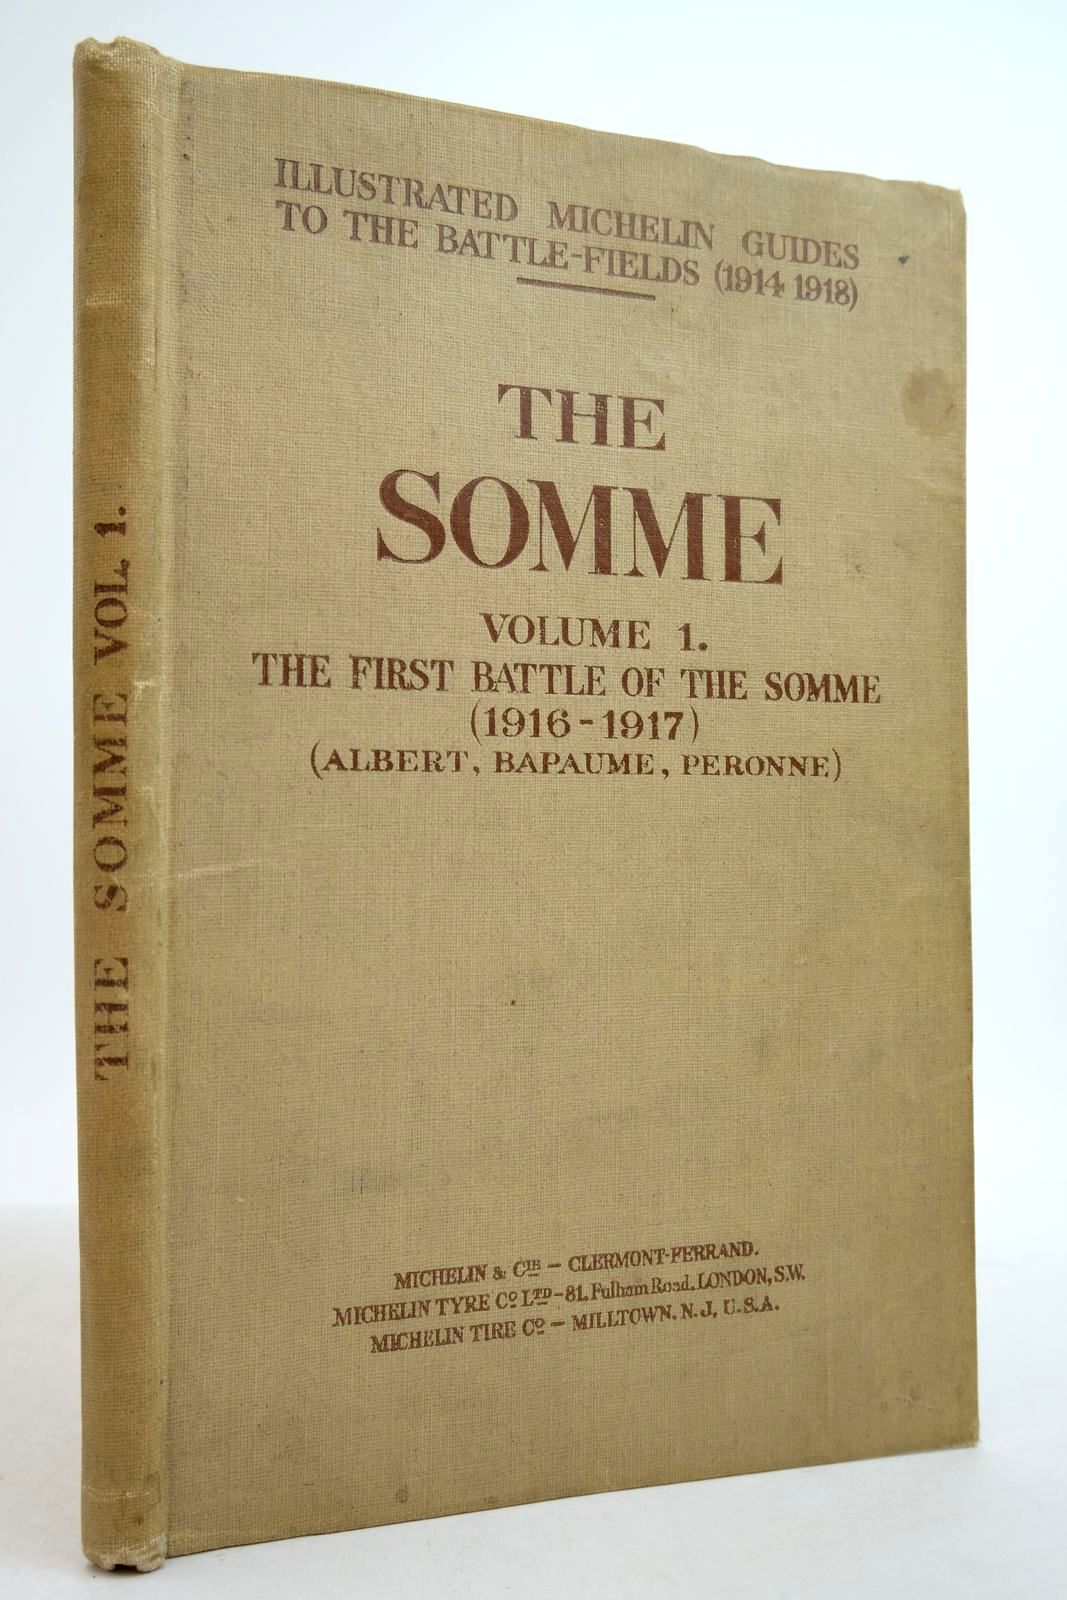 Photo of THE SOMME VOLUME I published by Michelin (STOCK CODE: 2134864)  for sale by Stella & Rose's Books